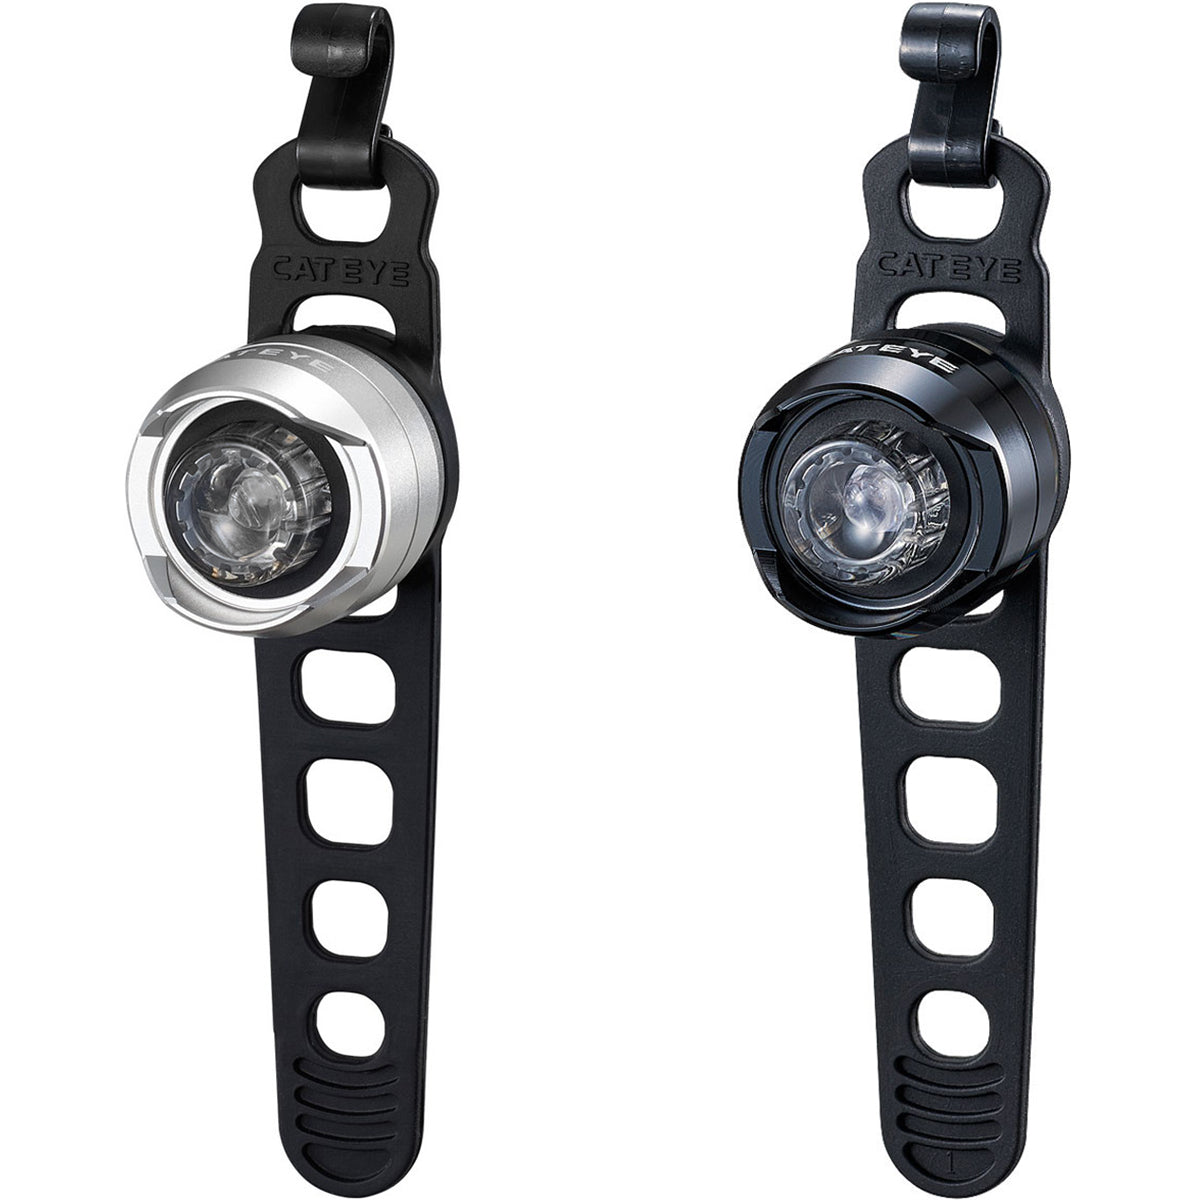 Cateye Orb Front and Rear Bicycle Light Combo Pack - SL-LD160 F/R CatEye